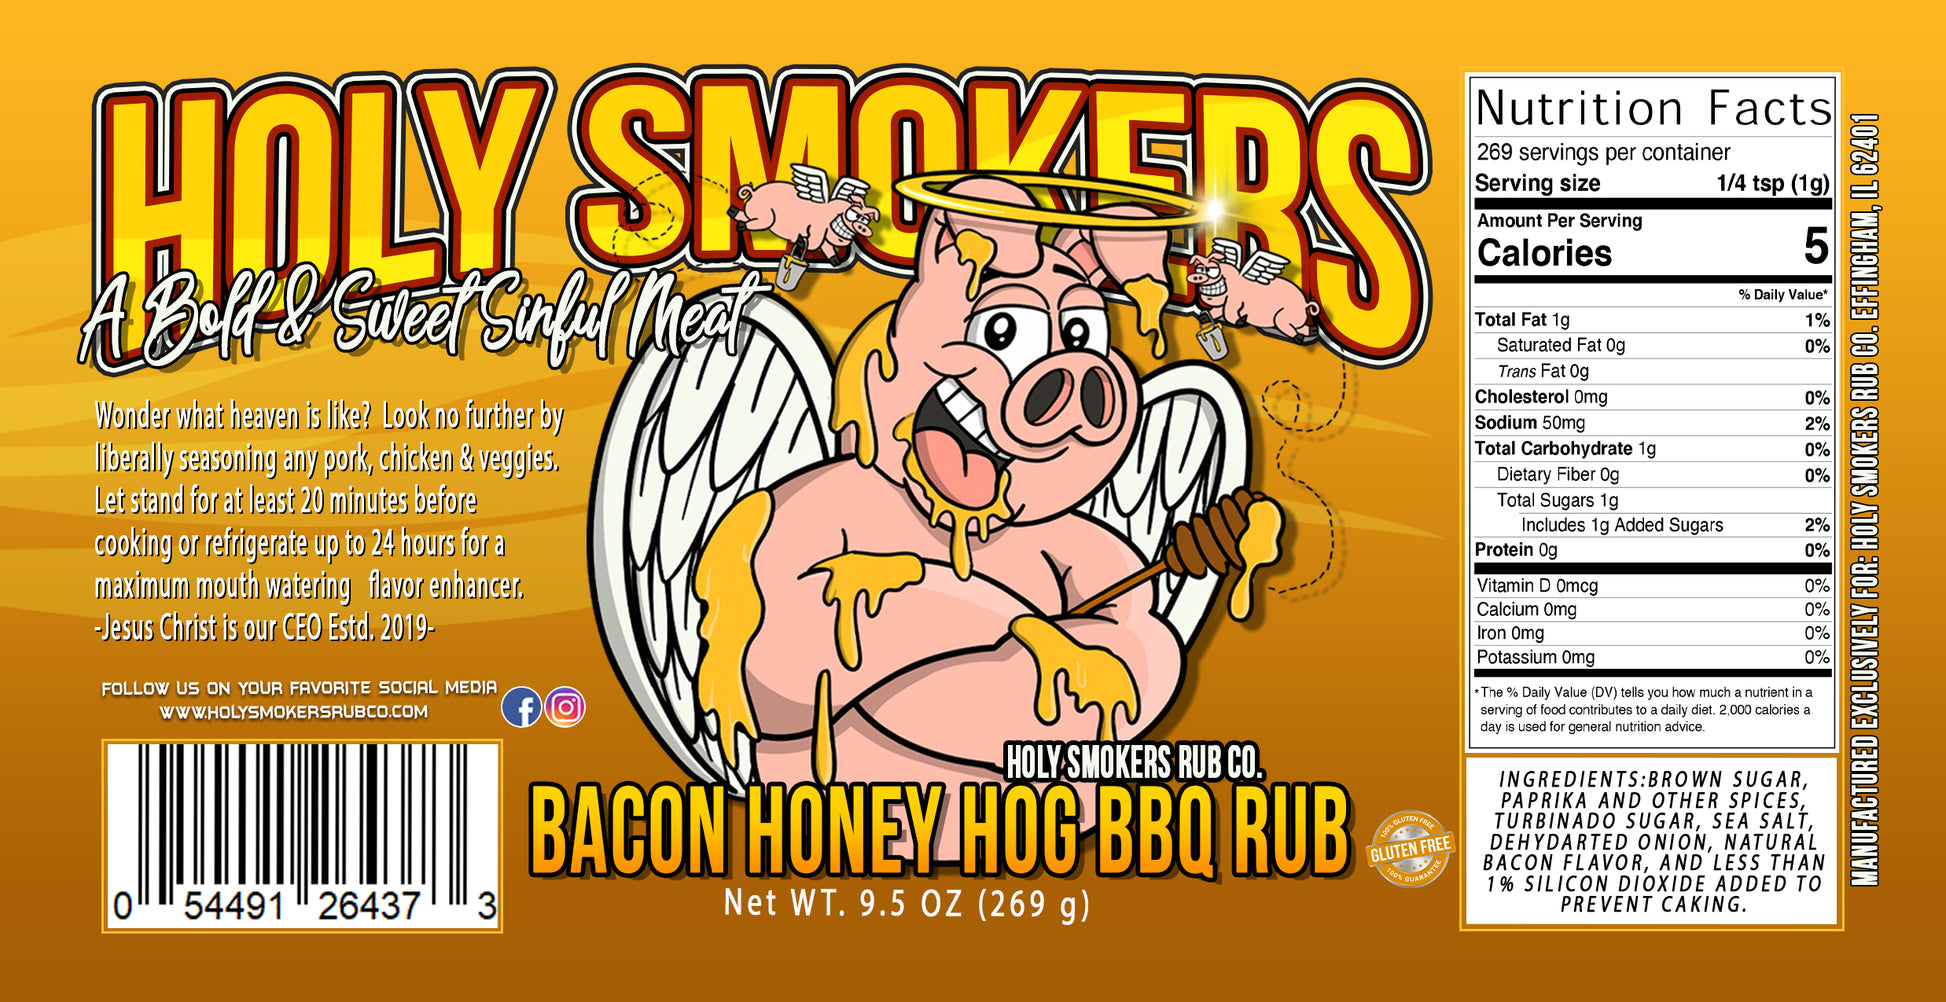 Bacon Honey Hog bbq rub by Holy Smokers Rub Co, for any beef, pork, poultry, sea food and veggies